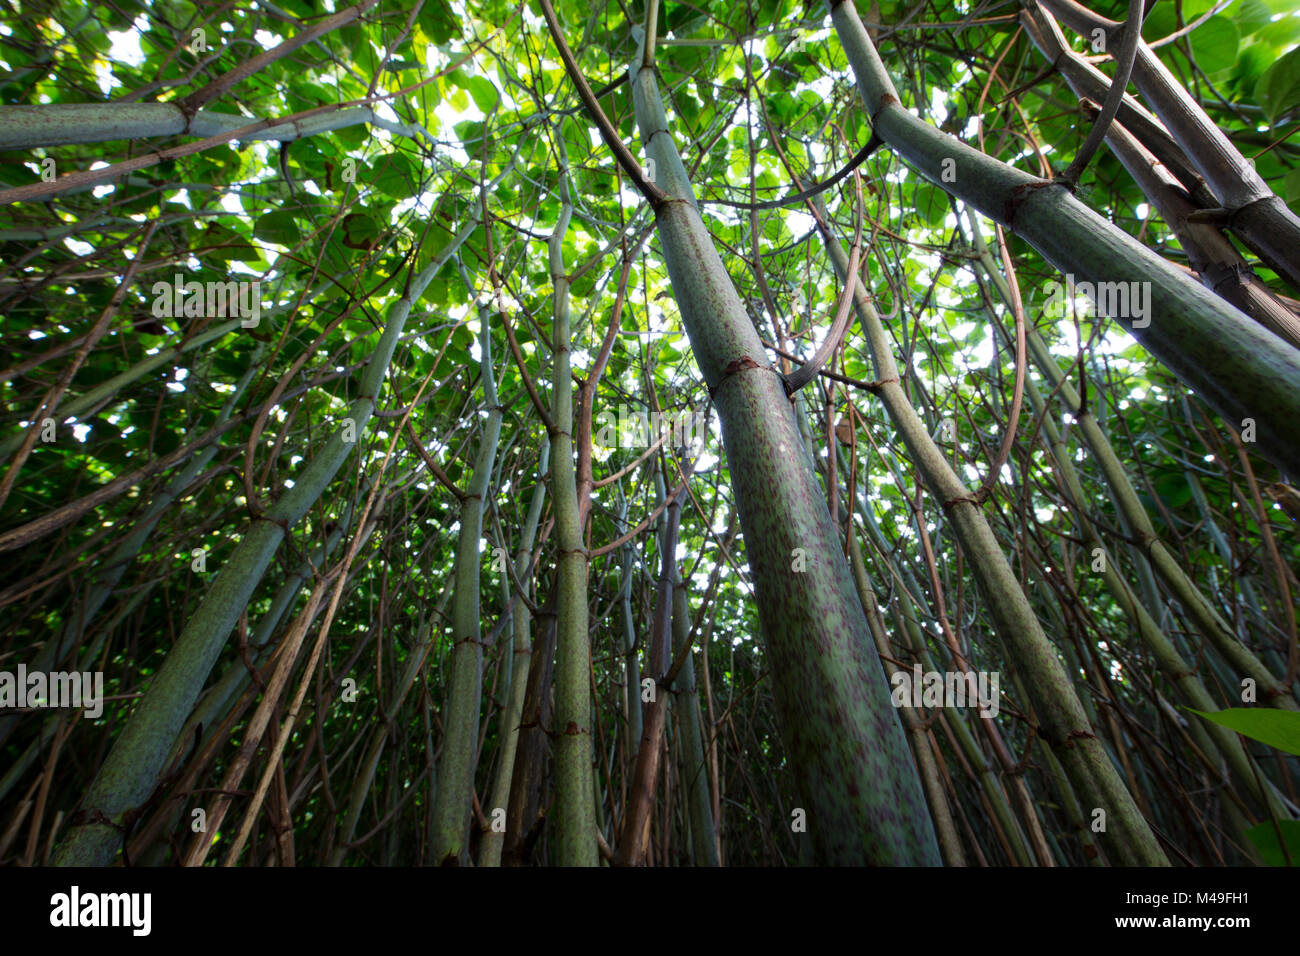 Japanese Knotweed (Fallopia japonica or Polygonum cuspidatum)  looking up through this invasive species, Burgundy, France, September Stock Photo